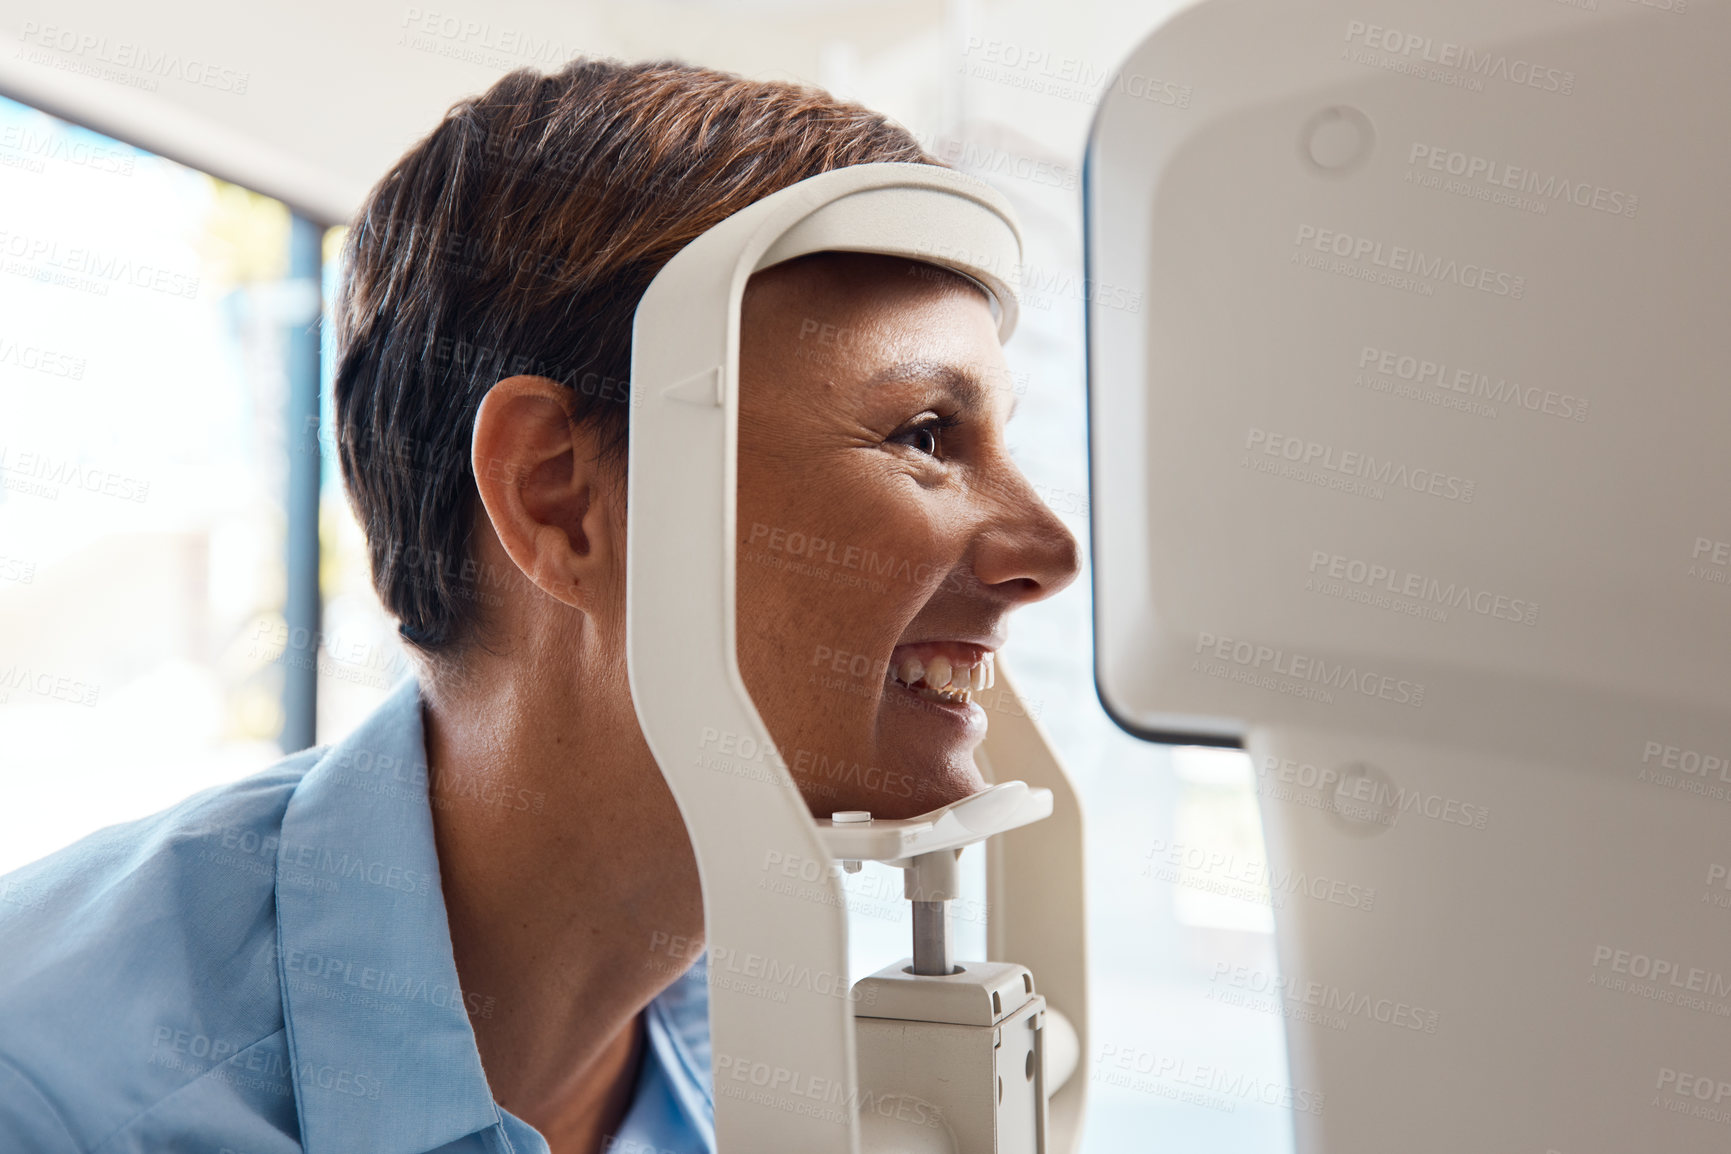 Buy stock photo Shot of a young woman getting her eye’s examined with an autorefractor